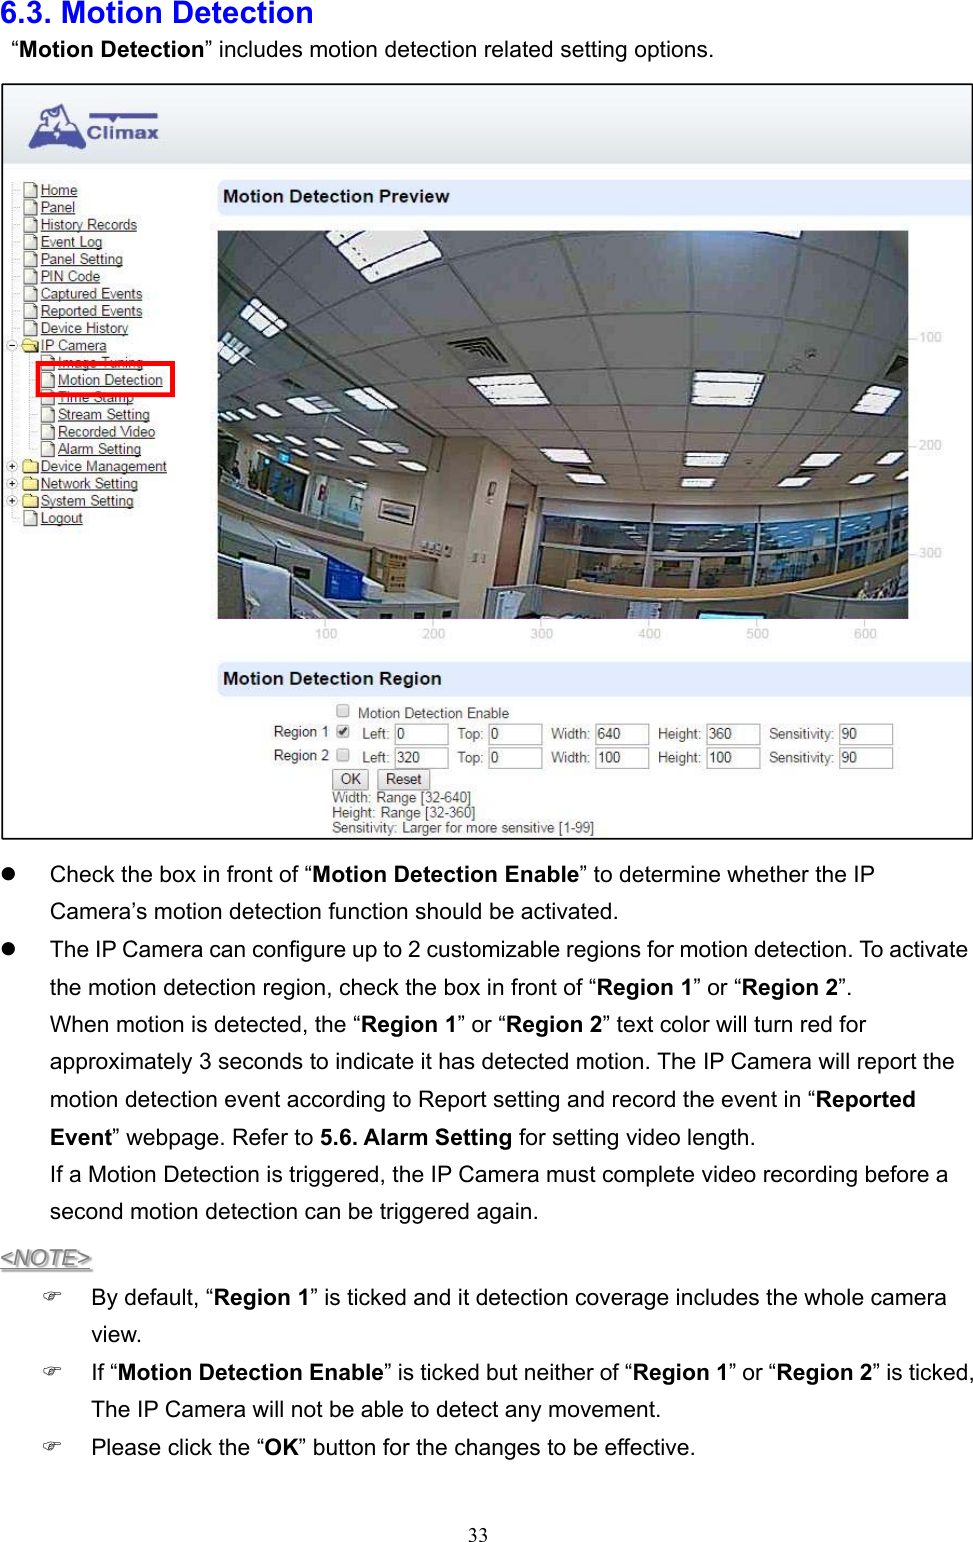  336.3. Motion Detection    “Motion Detection” includes motion detection related setting options.    Check the box in front of “Motion Detection Enable” to determine whether the IP Camera’s motion detection function should be activated.   The IP Camera can configure up to 2 customizable regions for motion detection. To activate the motion detection region, check the box in front of “Region 1” or “Region 2”. When motion is detected, the “Region 1” or “Region 2” text color will turn red for approximately 3 seconds to indicate it has detected motion. The IP Camera will report the motion detection event according to Report setting and record the event in “Reported Event” webpage. Refer to 5.6. Alarm Setting for setting video length. If a Motion Detection is triggered, the IP Camera must complete video recording before a second motion detection can be triggered again. &lt;NOTE&gt;   By default, “Region 1” is ticked and it detection coverage includes the whole camera view.   If “Motion Detection Enable” is ticked but neither of “Region 1” or “Region 2” is ticked, The IP Camera will not be able to detect any movement.   Please click the “OK” button for the changes to be effective.  